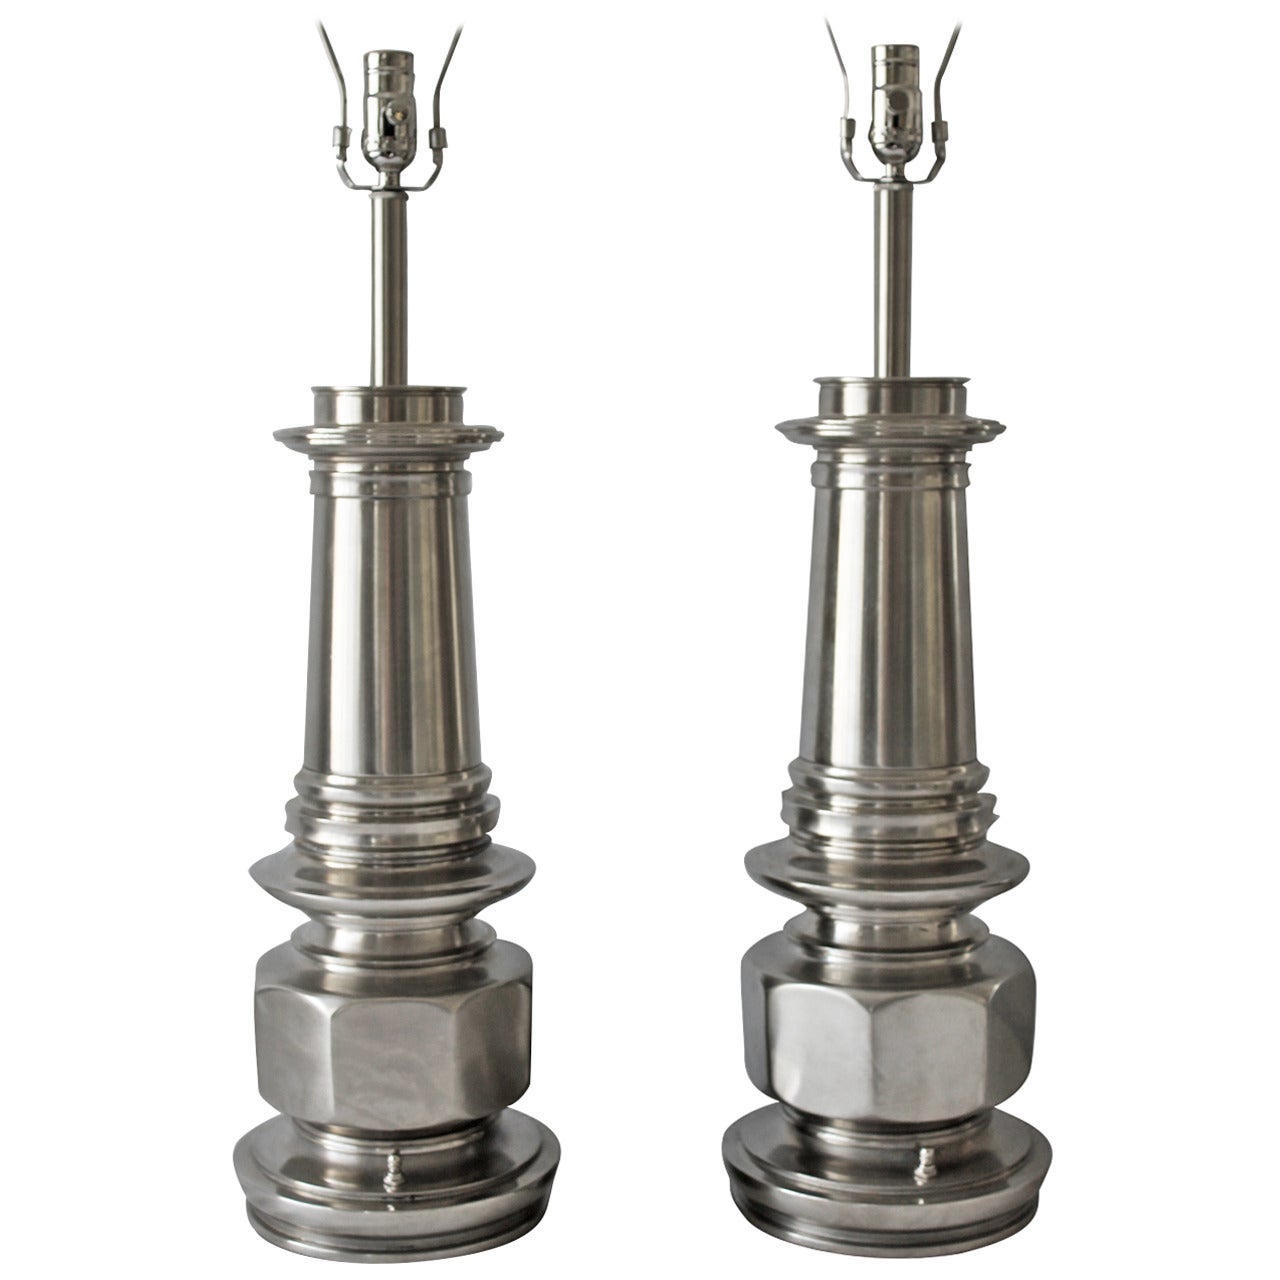 Pair of Chrome Lamps by the Stiffel Lamp Co.